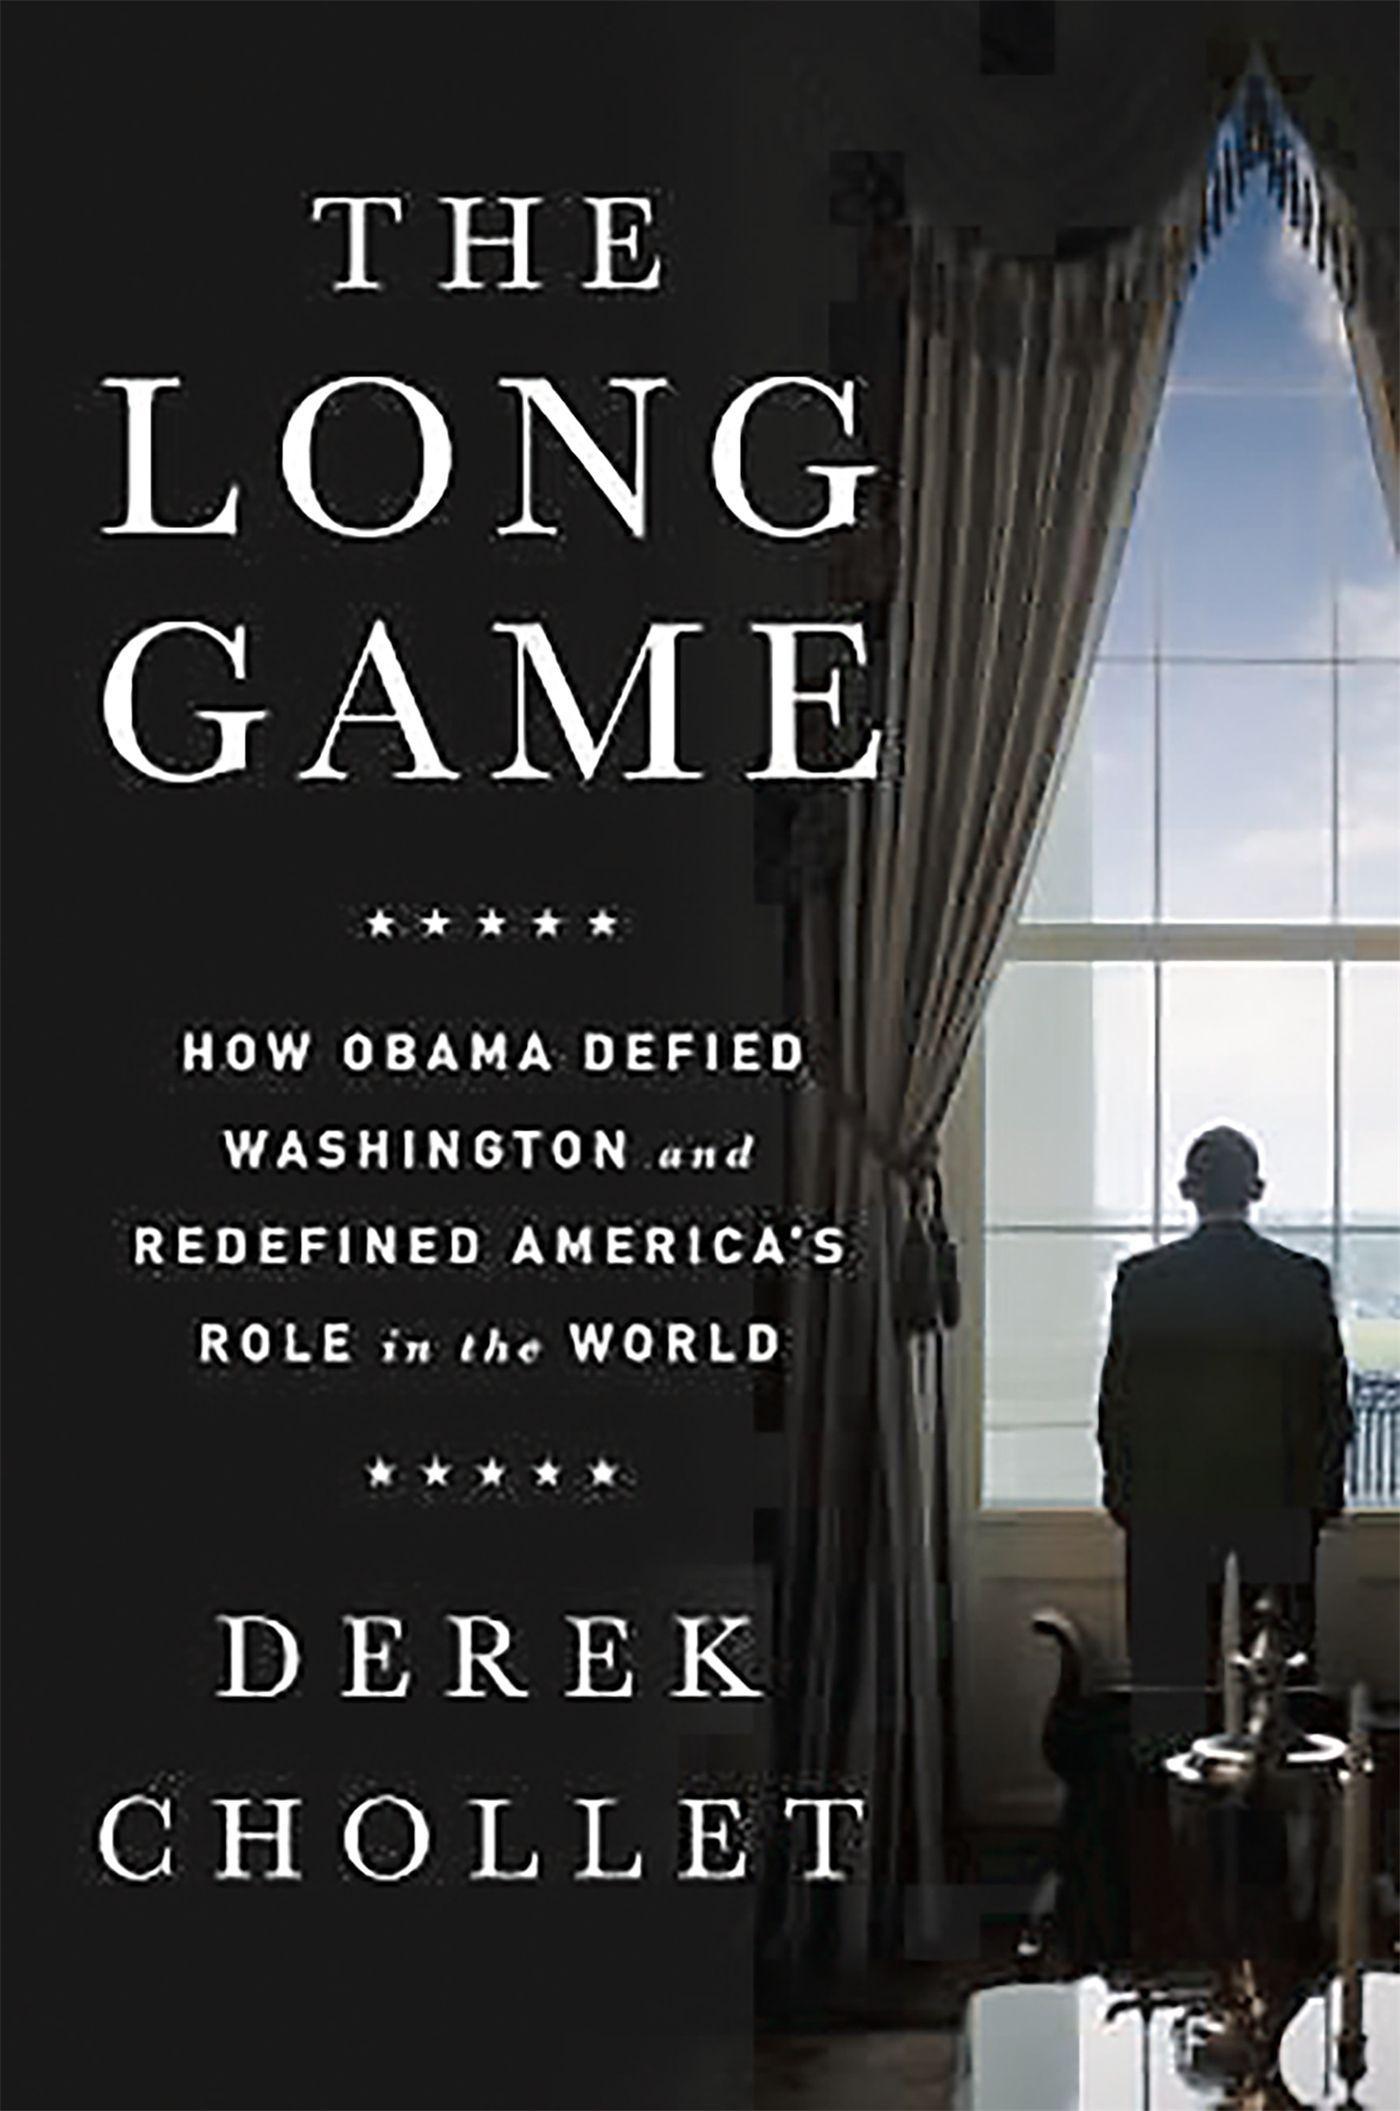 The Long Game: How Obama Defied Washington and Redefined America's Role in the World / Derek Chollet / Buch / Englisch / 2016 / PUBLICAFFAIRS / EAN 9781610396608 - Chollet, Derek